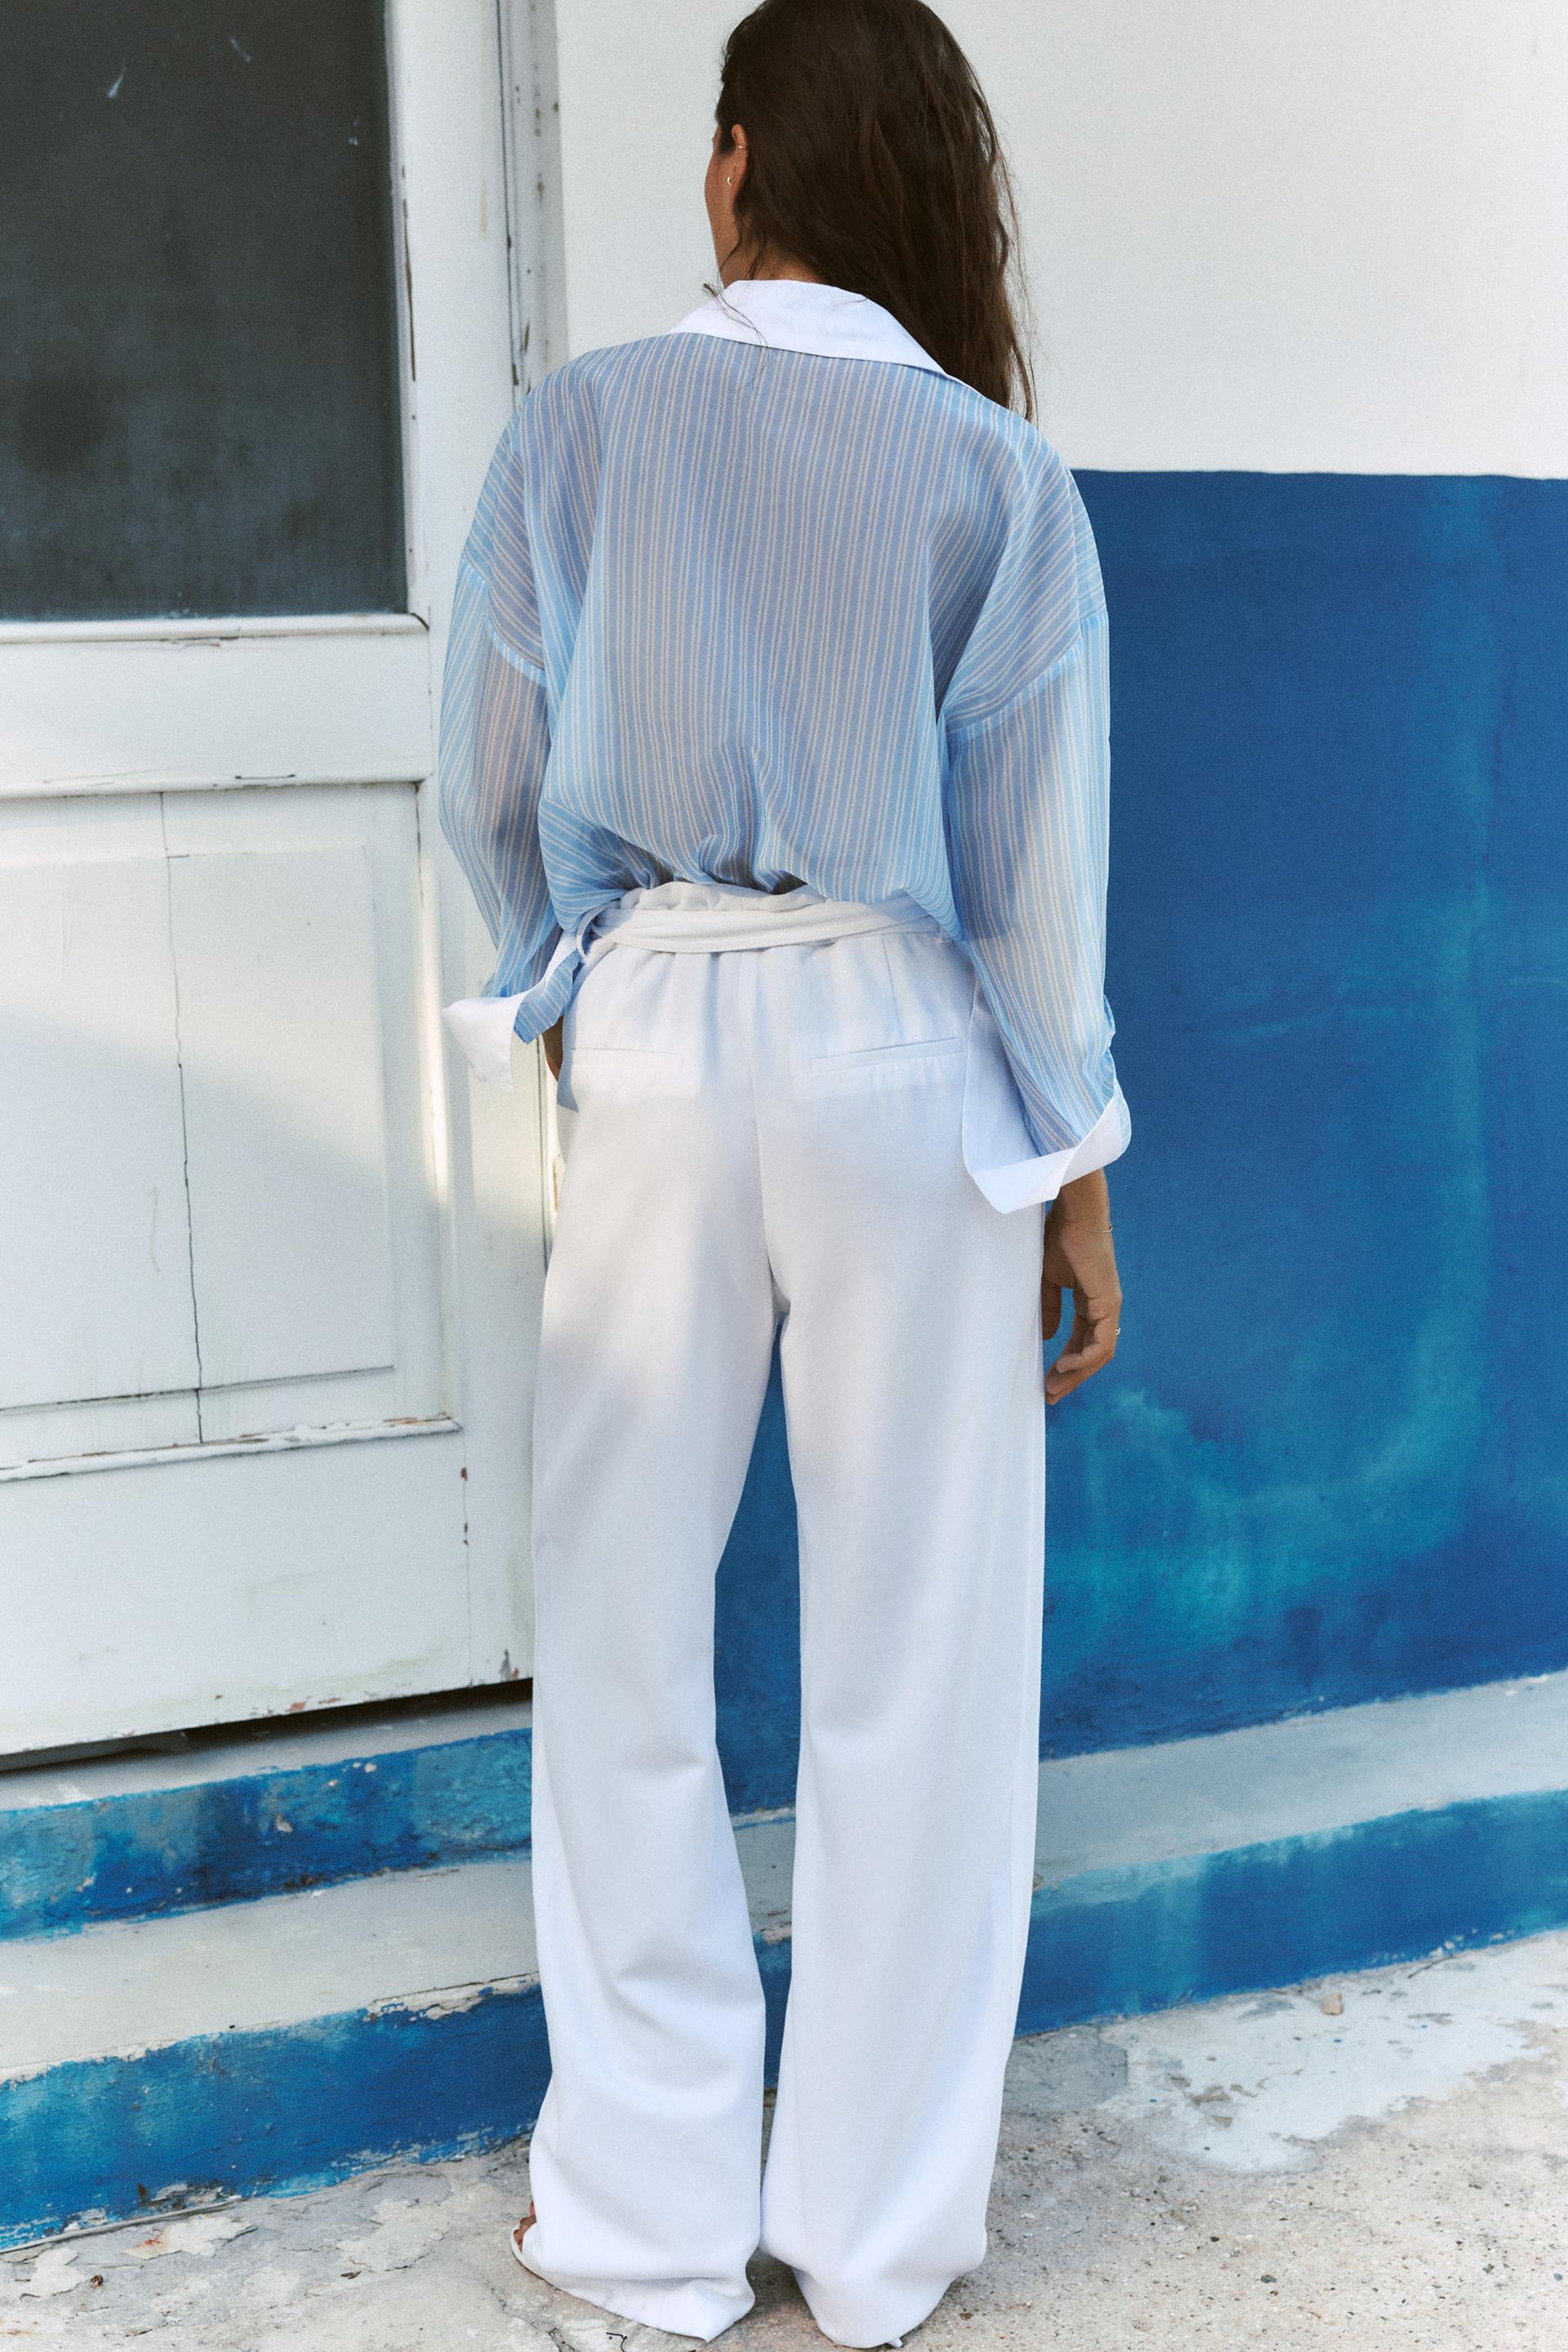 These belted pants from Zara are part of my uniform. I have them in 6